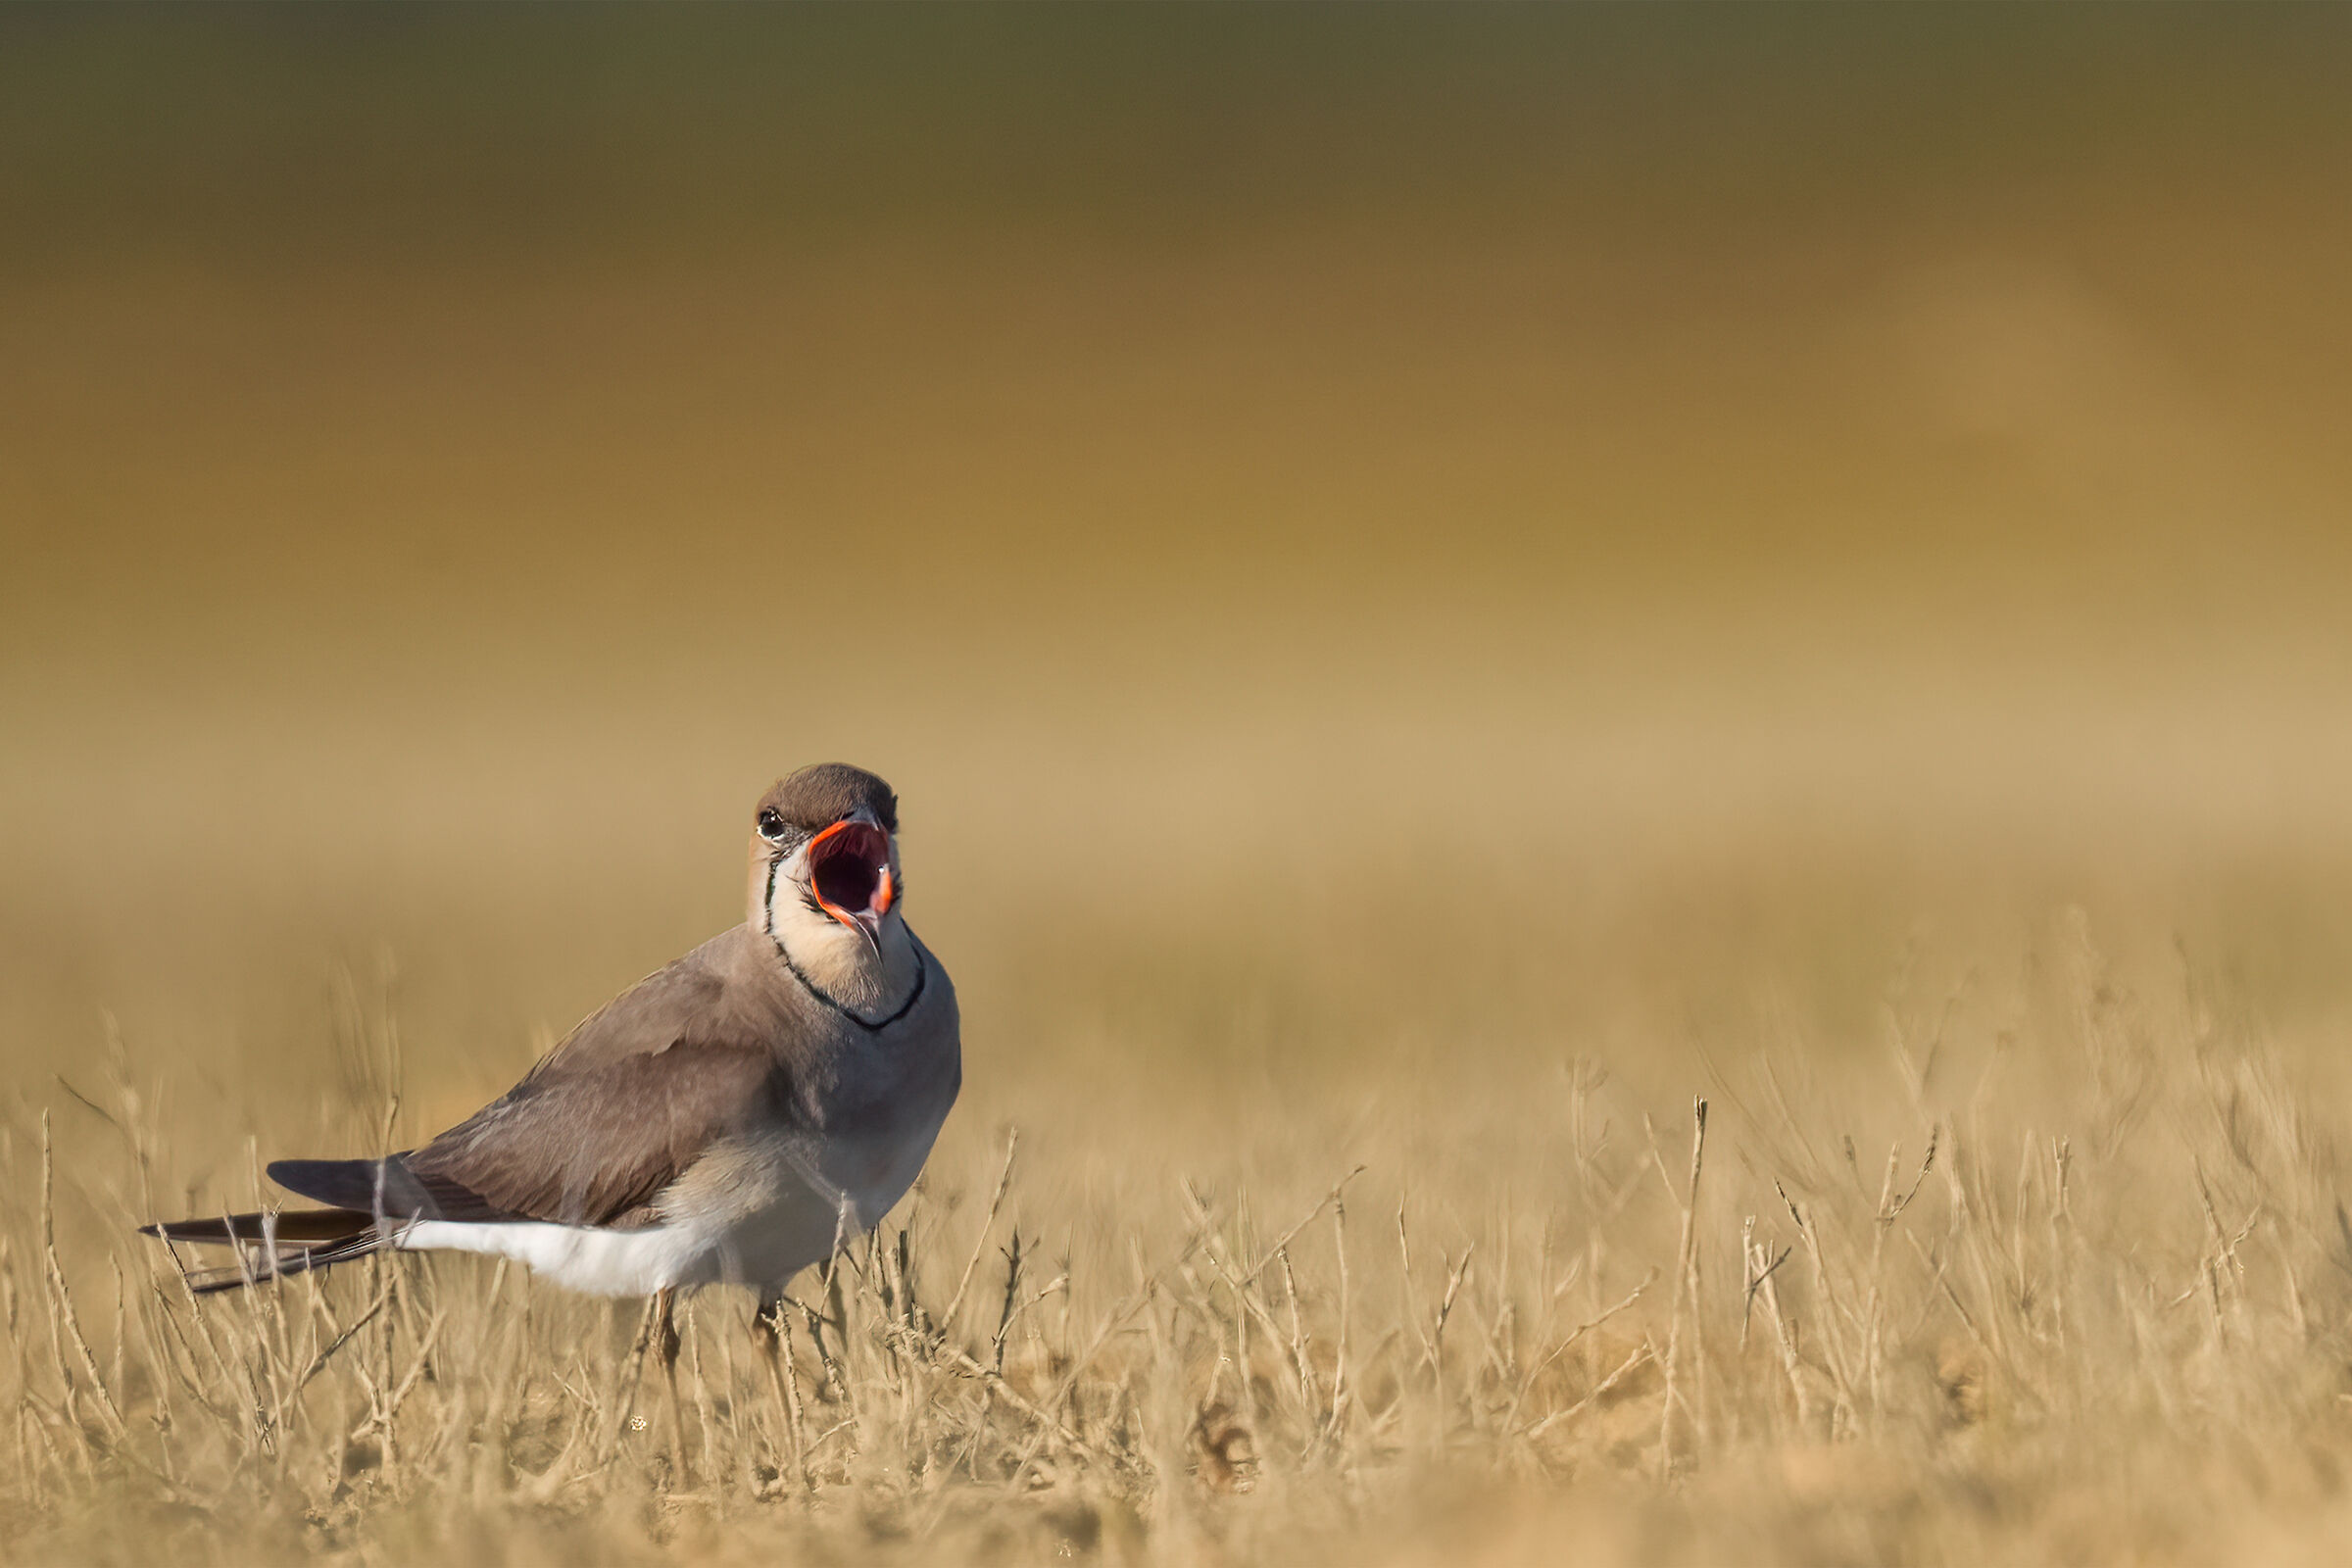 The partridge in the steppe...